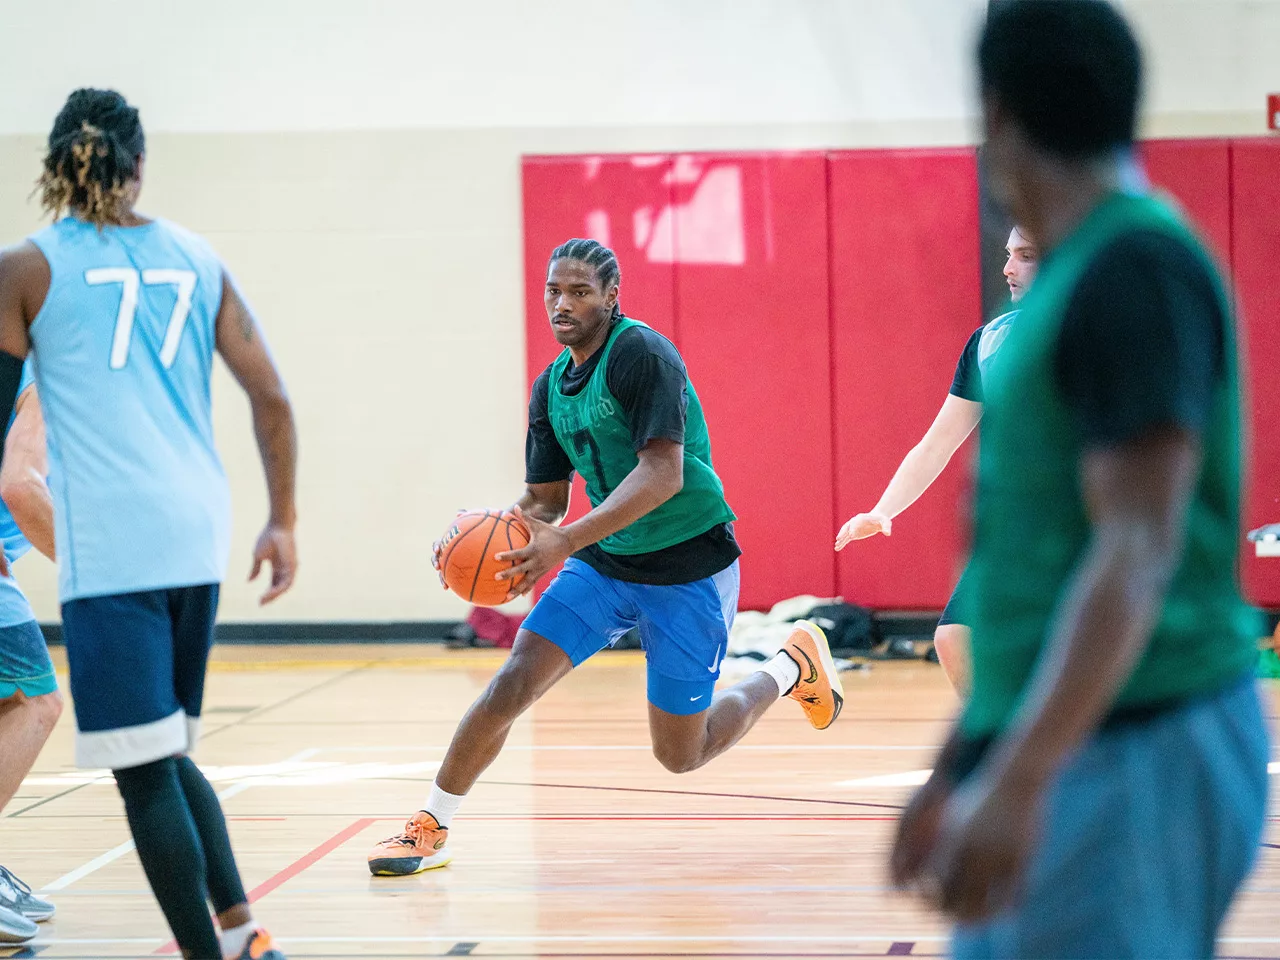 An adult basketball player navigates the court with the ball.